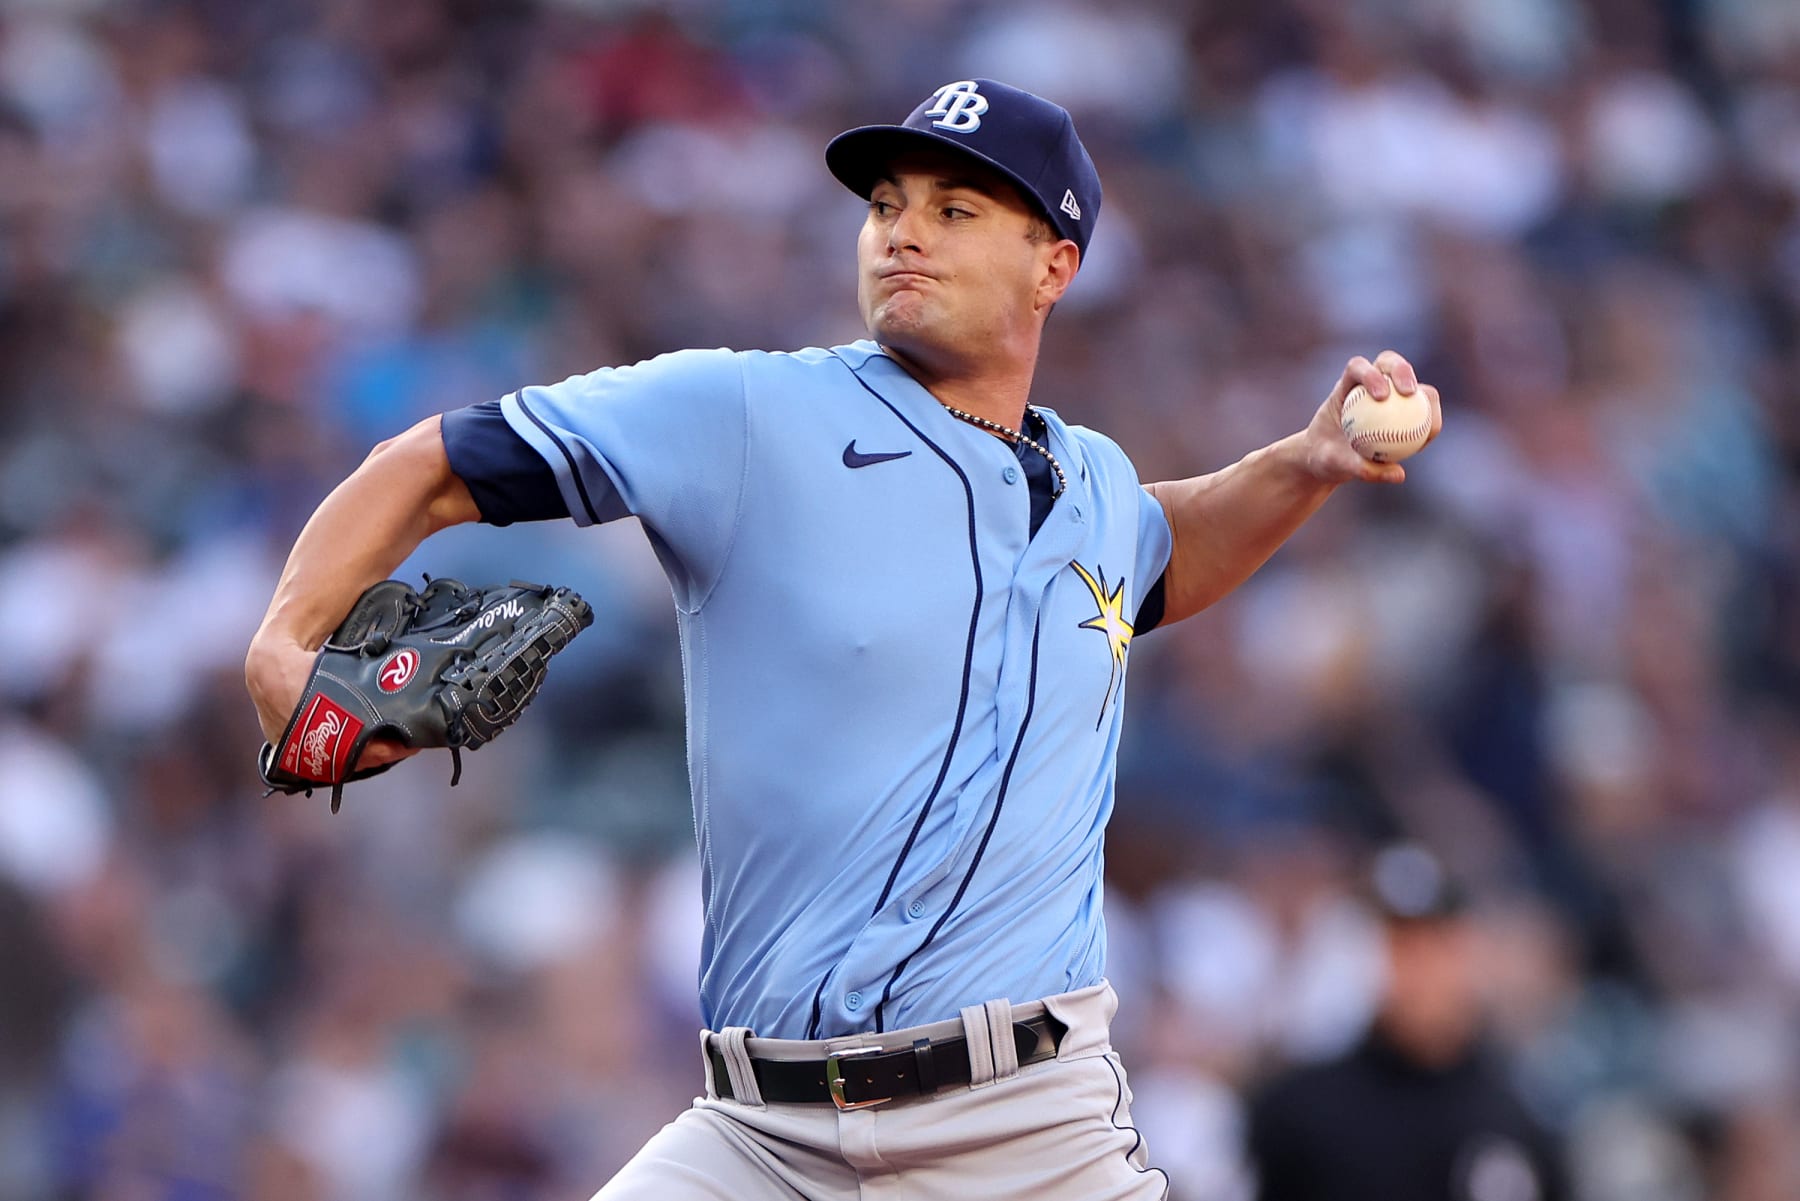 Yankees remain inactive on trade block while suffering loss to Rays